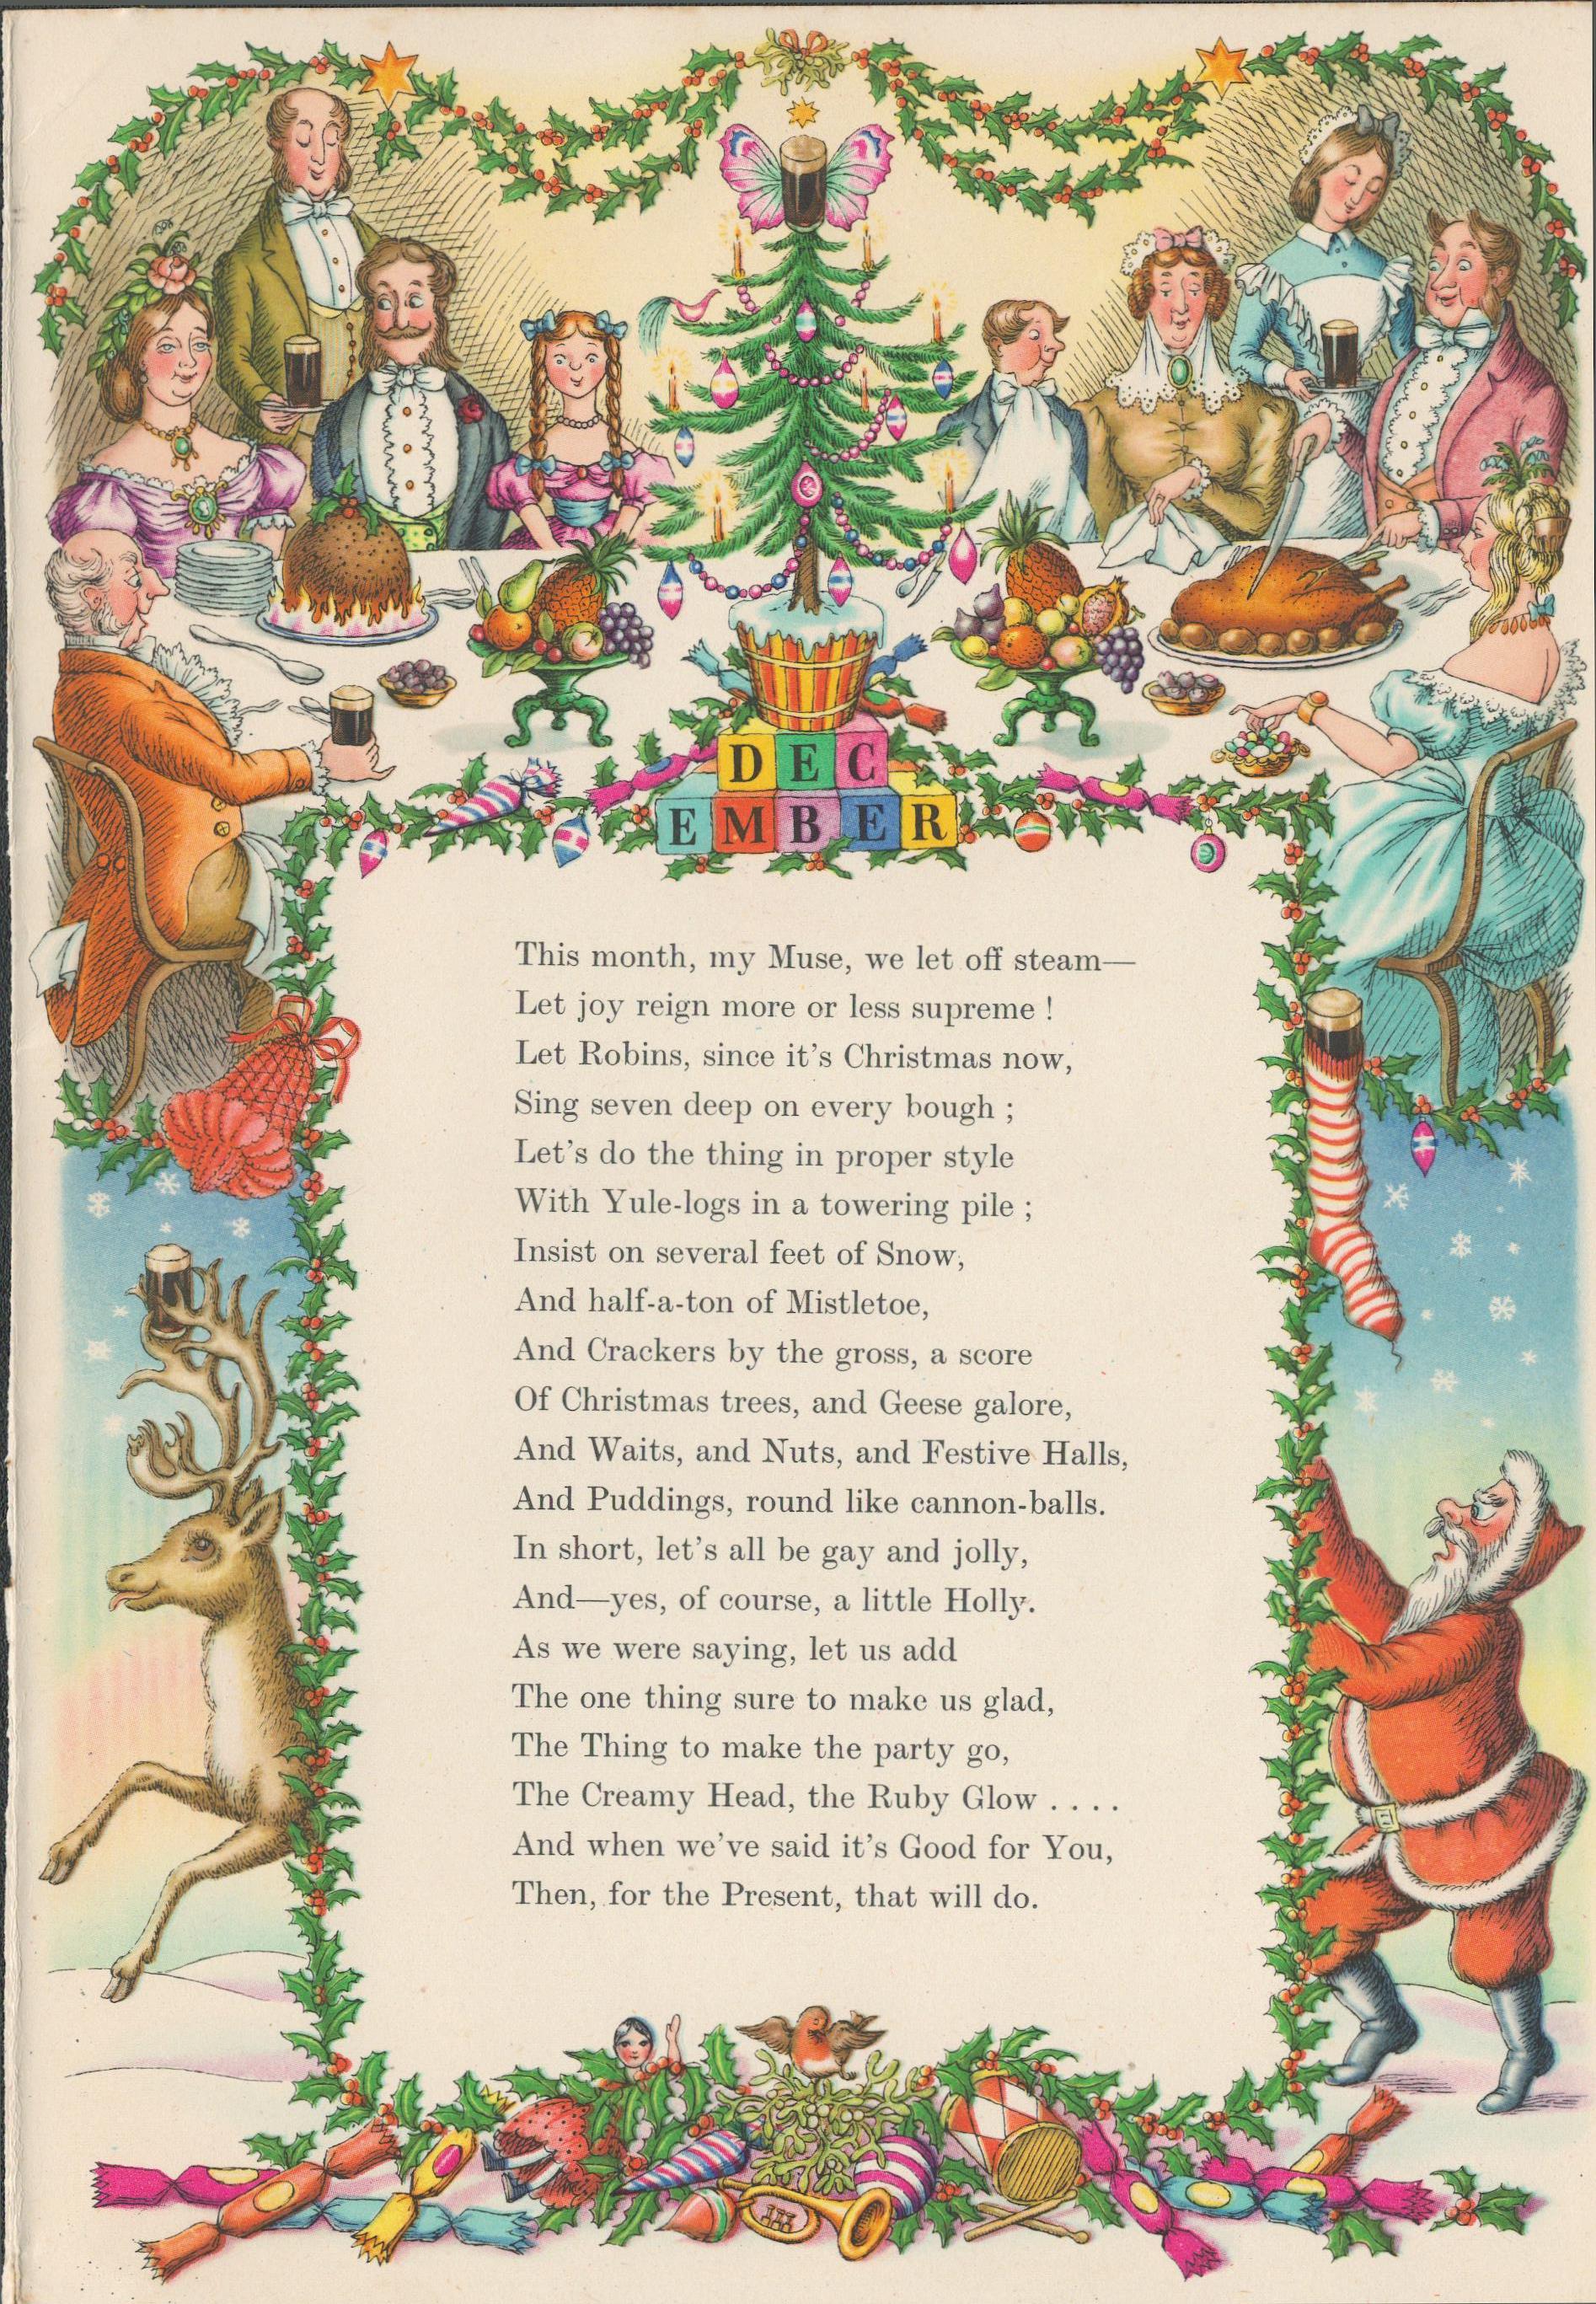 Double Sided Guinness Print 1952 ""Christmas Dinner & Santa" "A Genuine Double Sided Lithographed